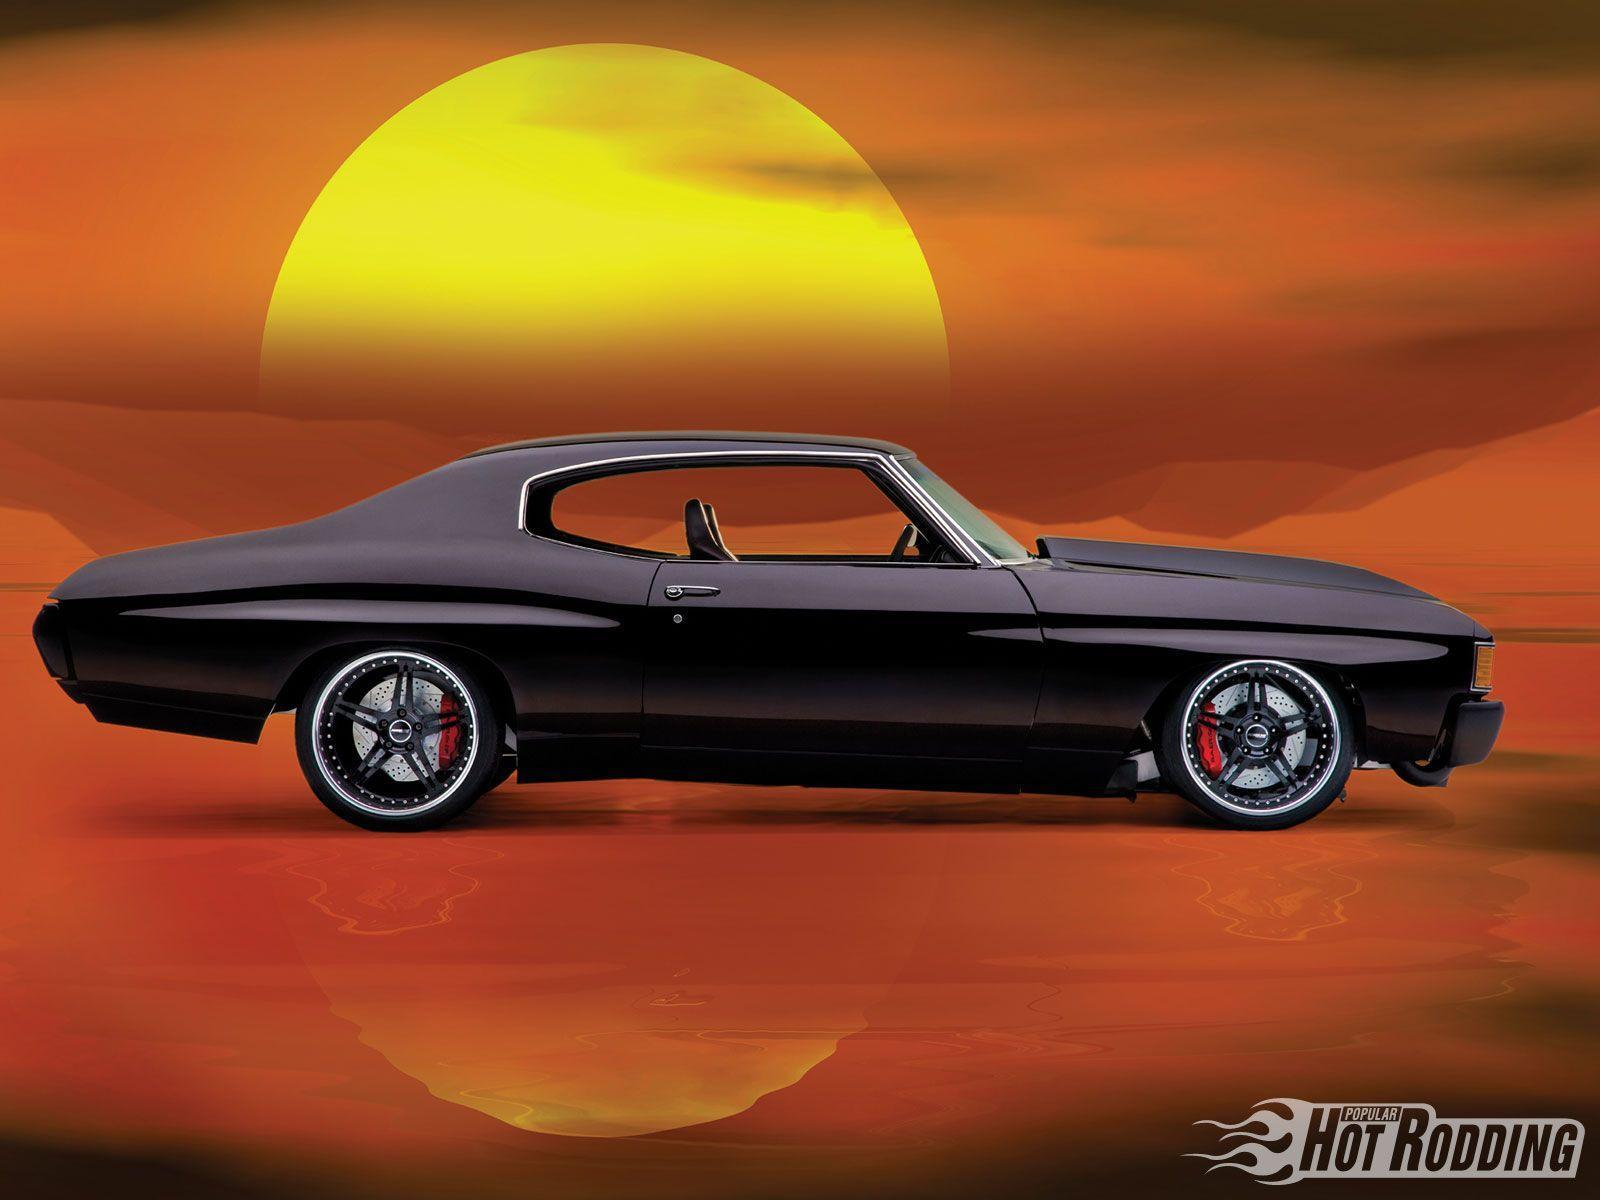 Chevy Chevelle Computer Wallpapers, Desk 4K Backgrounds